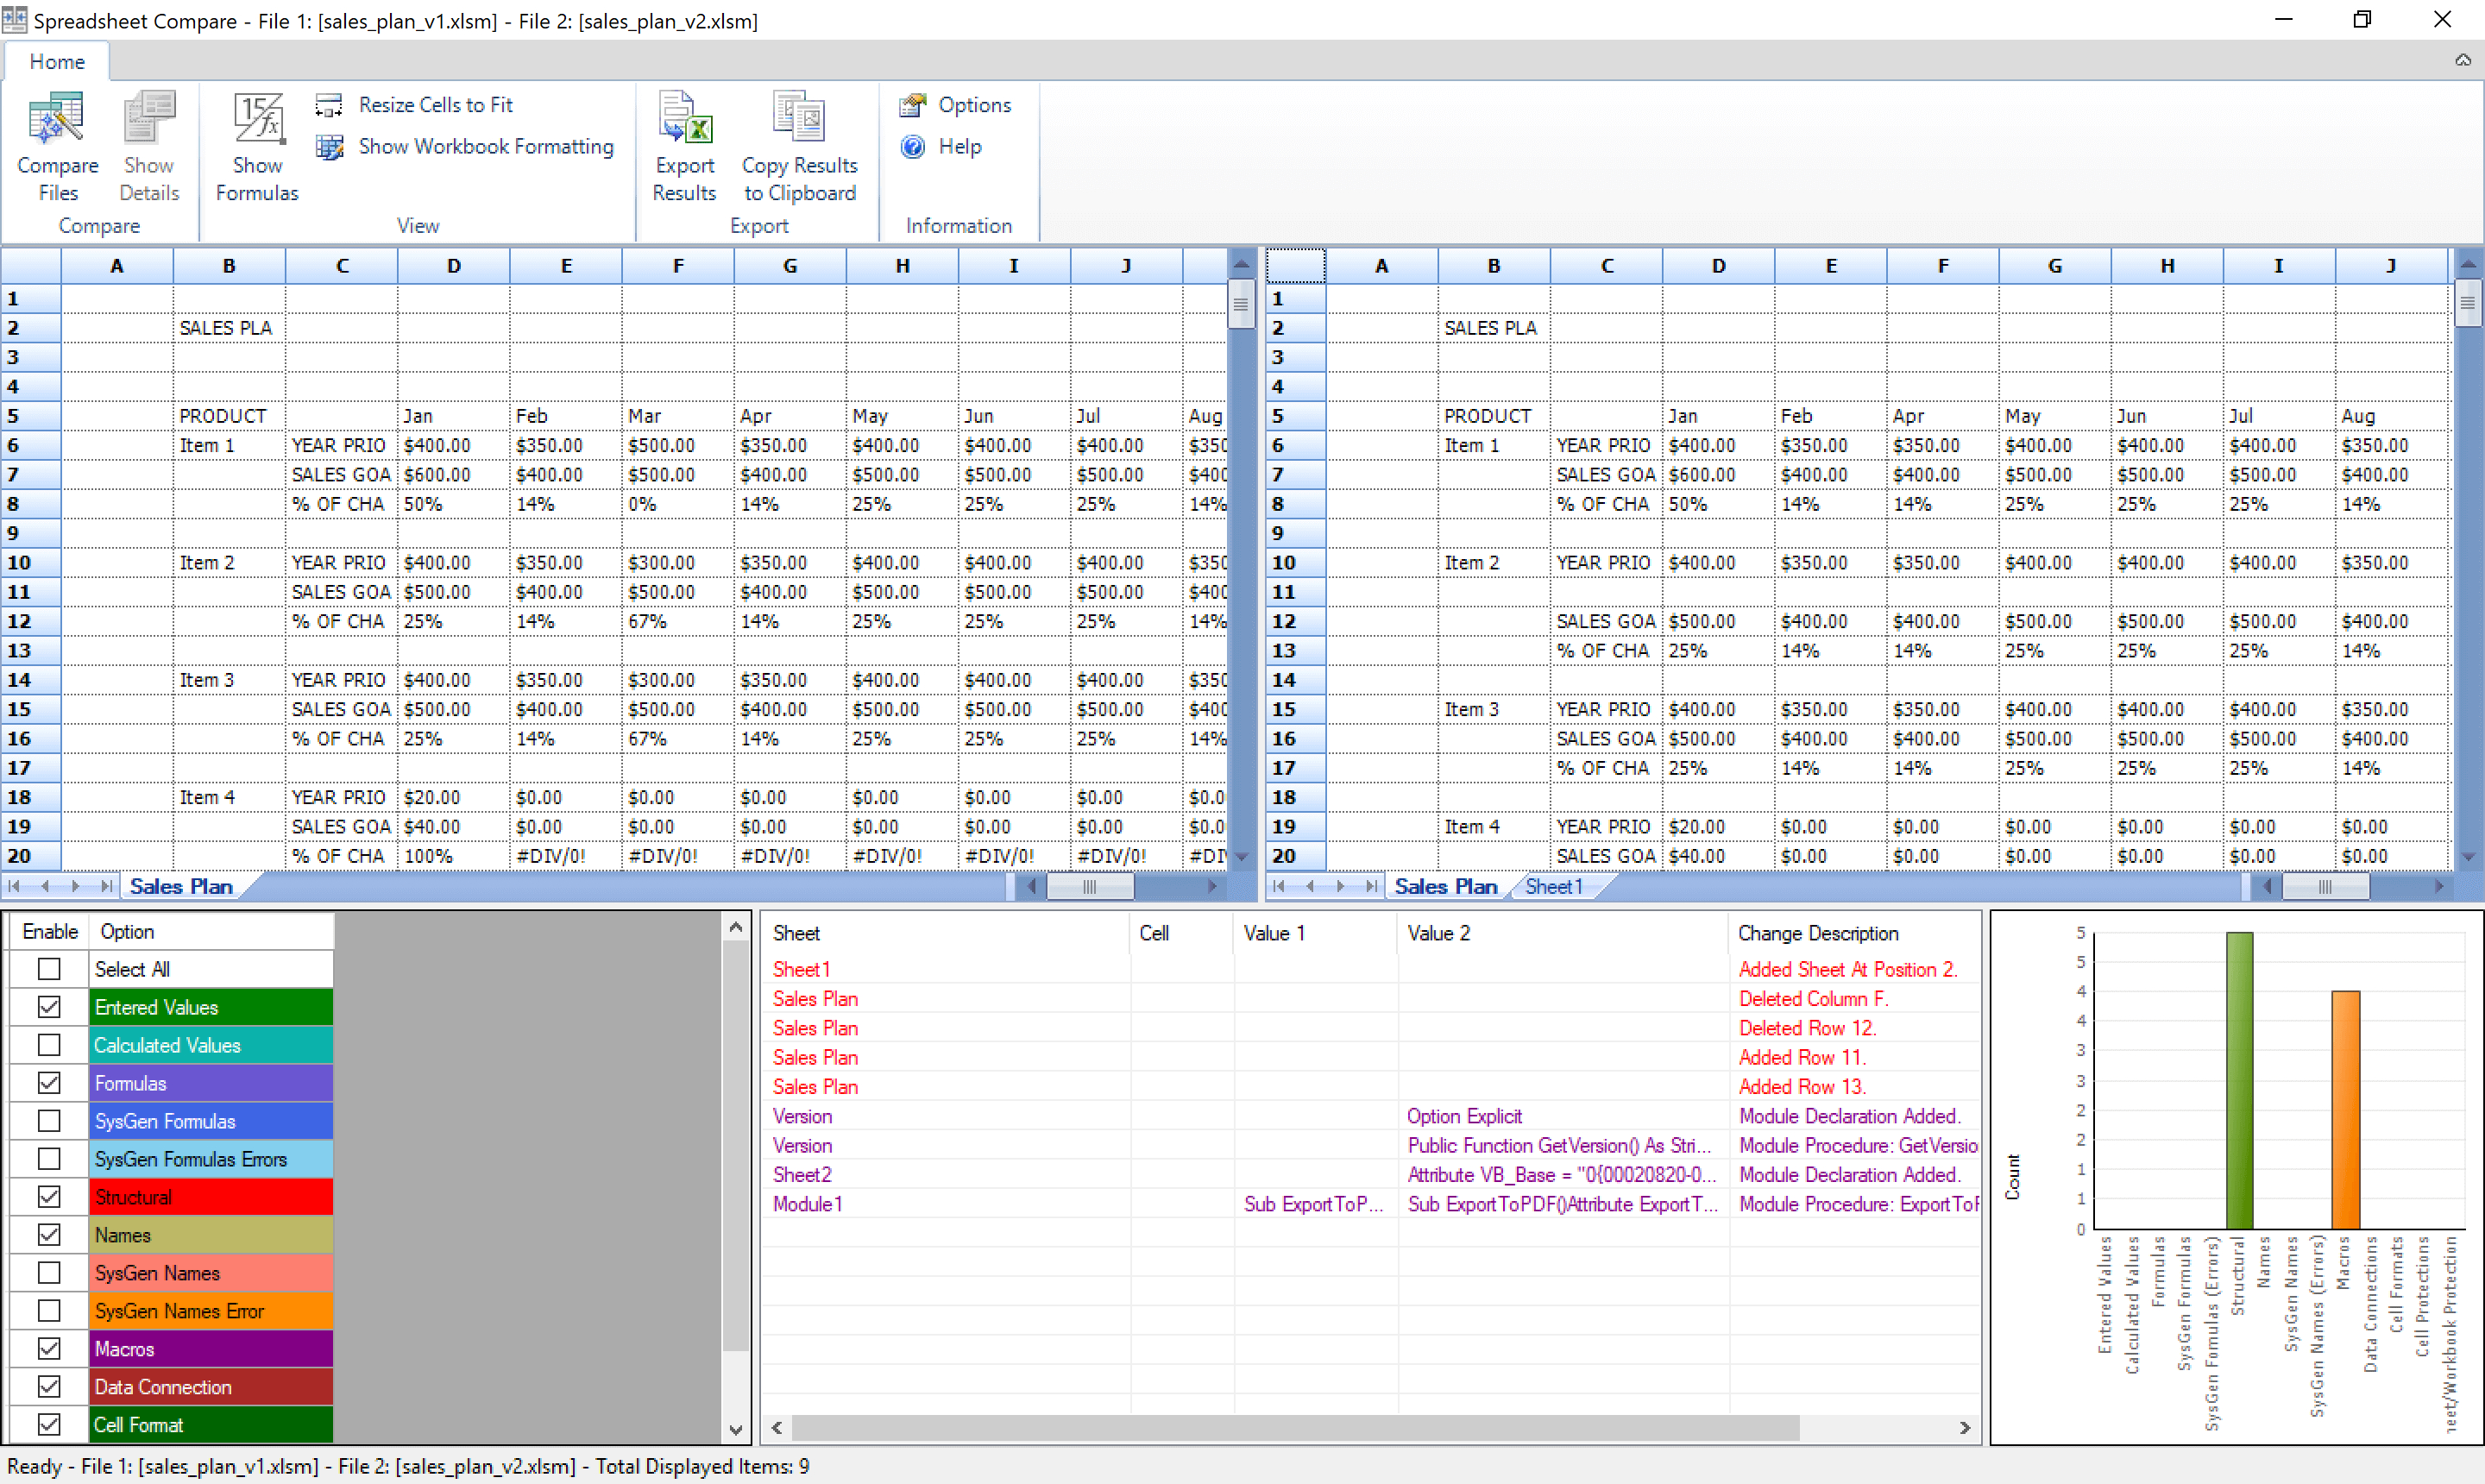 Spreadsheet Compare Intended For 5 Tools To Compare Excel Files Spreadsheet Compare ...2880 x 1720